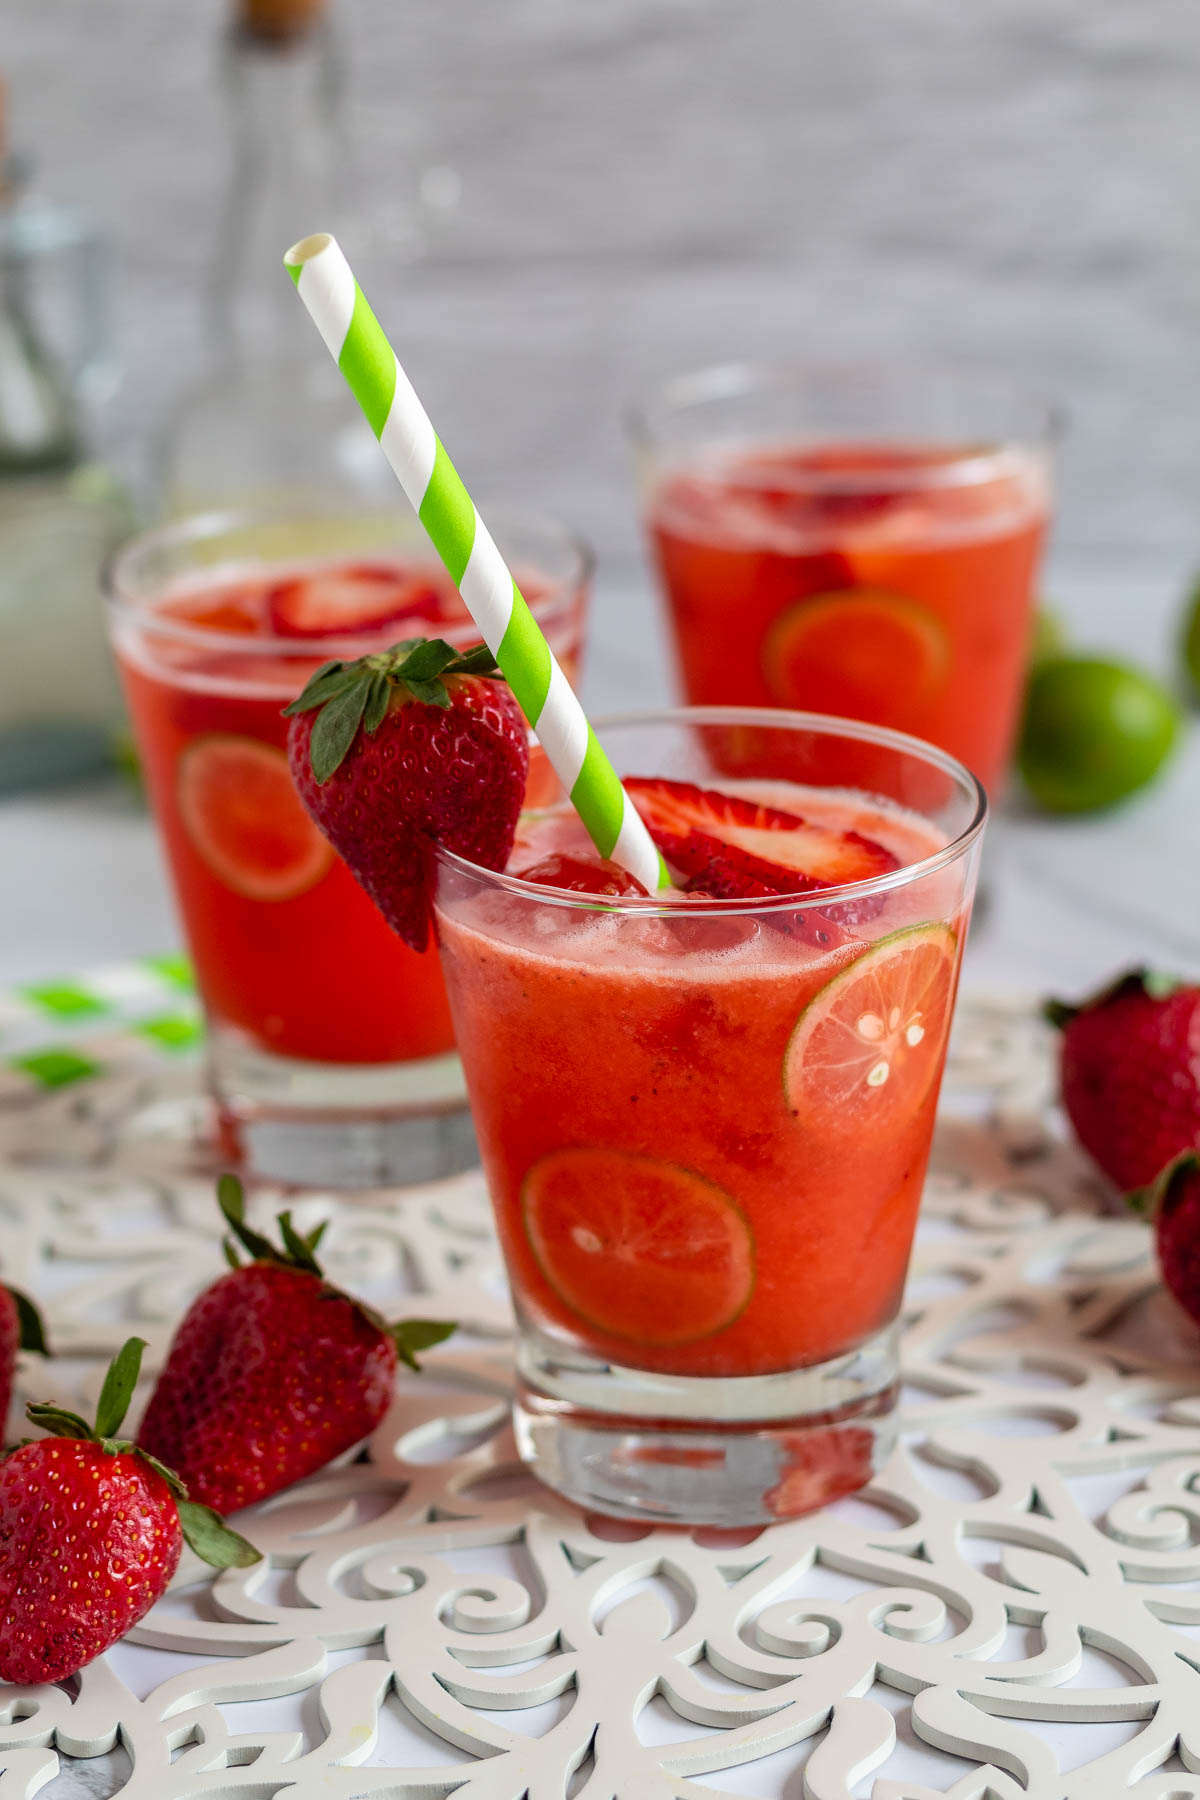 Three glasses of strawberry limemade served up on white table.